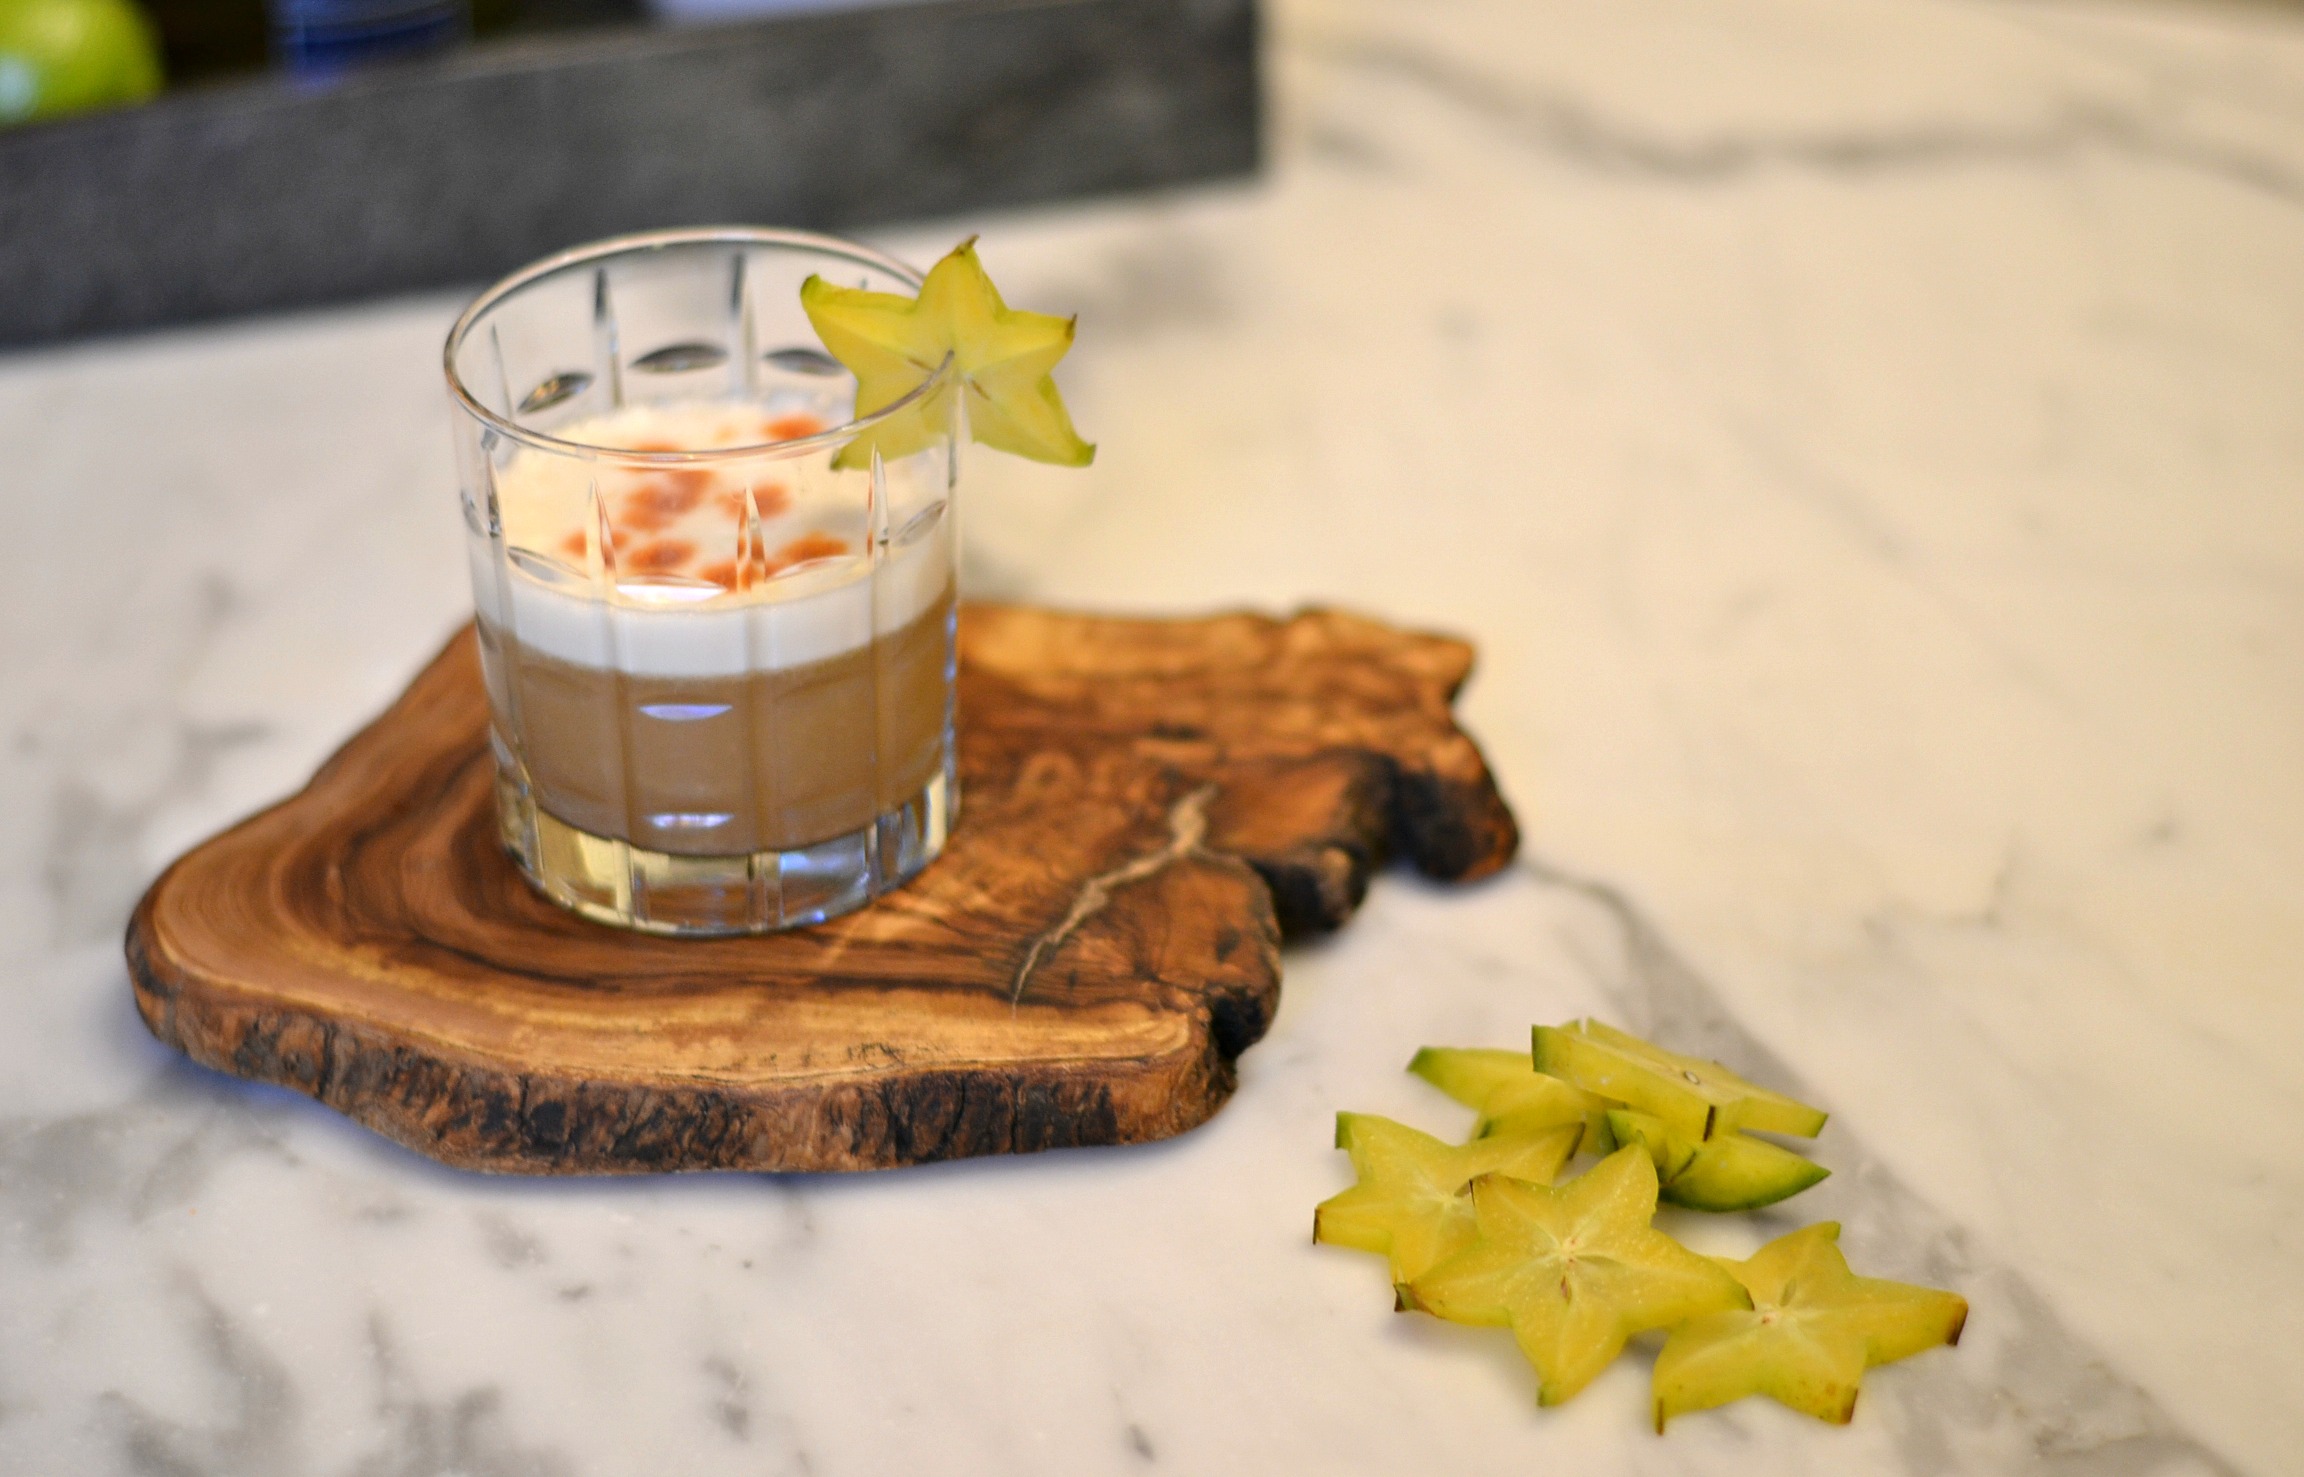 Pisco sour cocktail garnished with a slice of starfruit